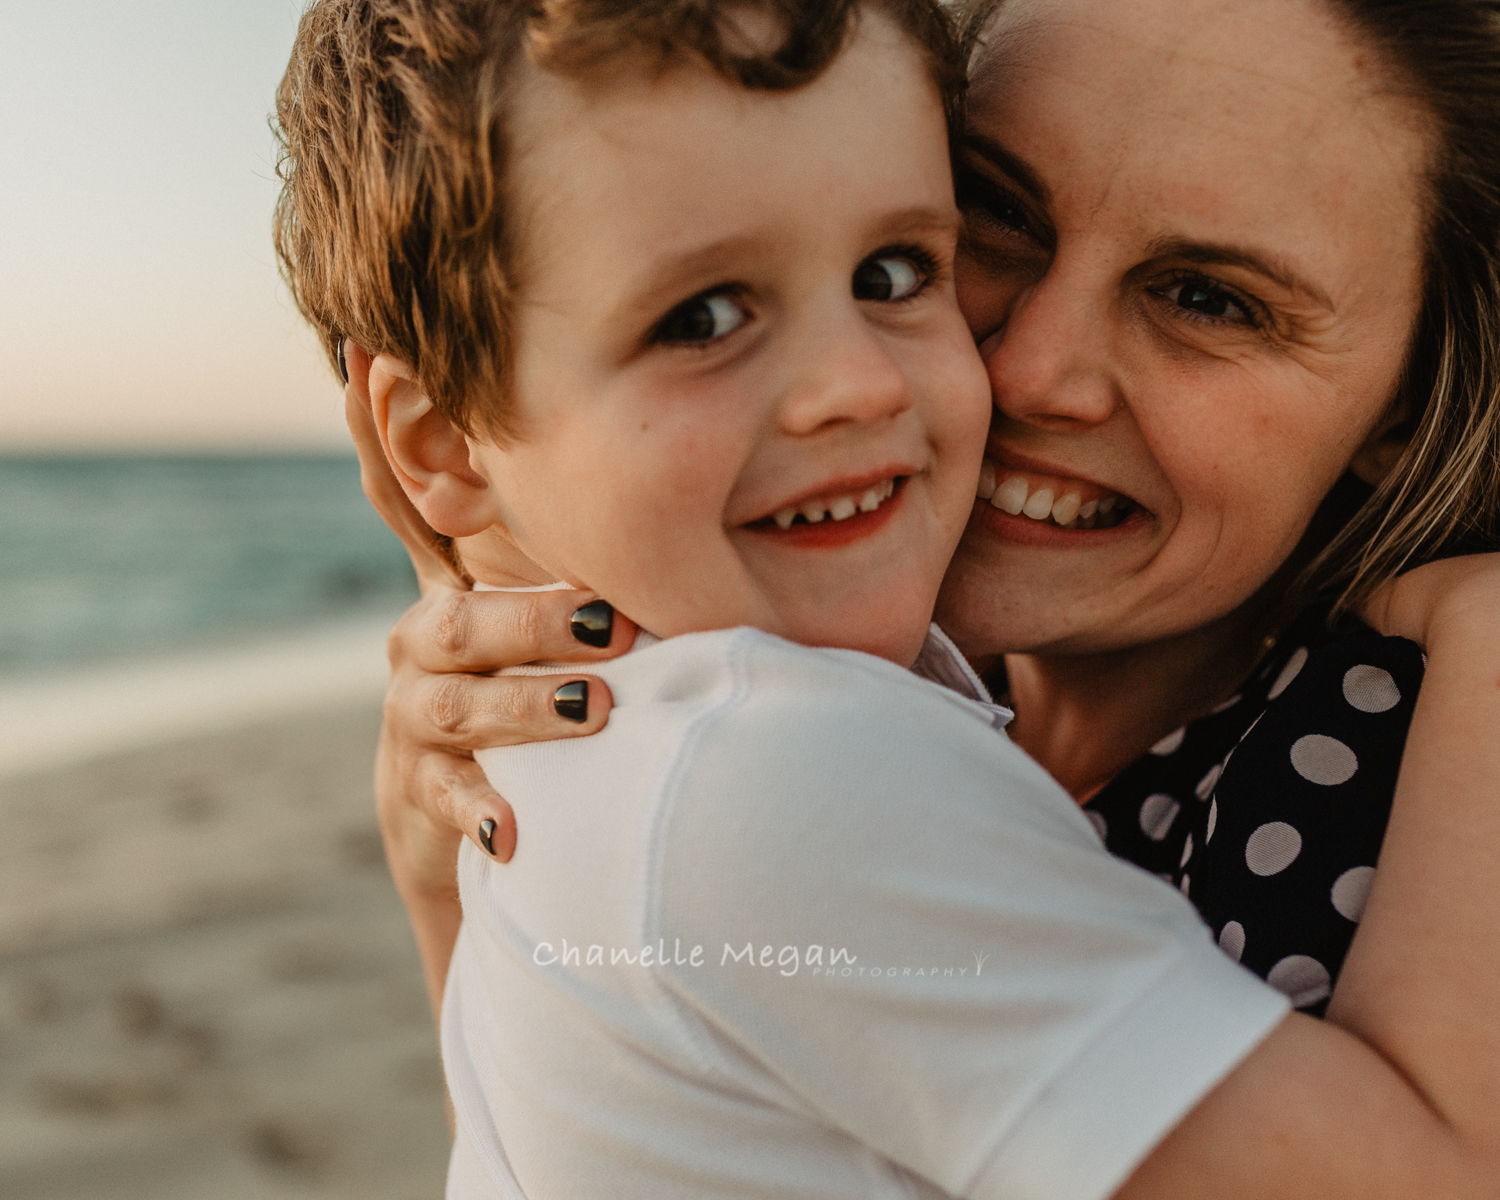 Mummy and Me Portrait. Perth Family Photographer, Chanelle Megan Photographu